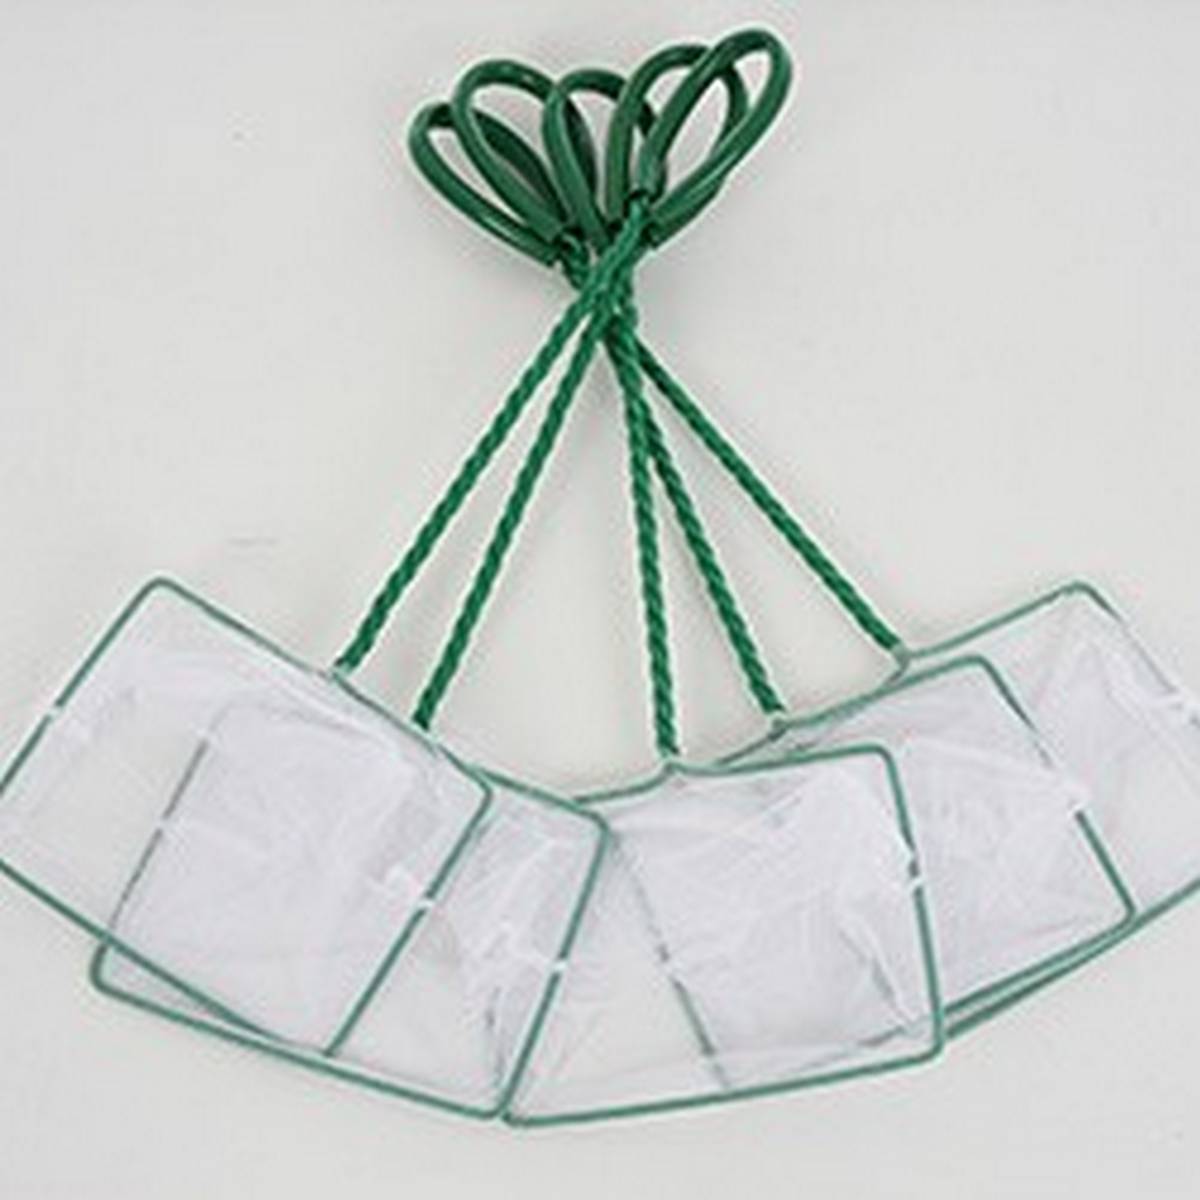 Pond Nets - Pack of 5